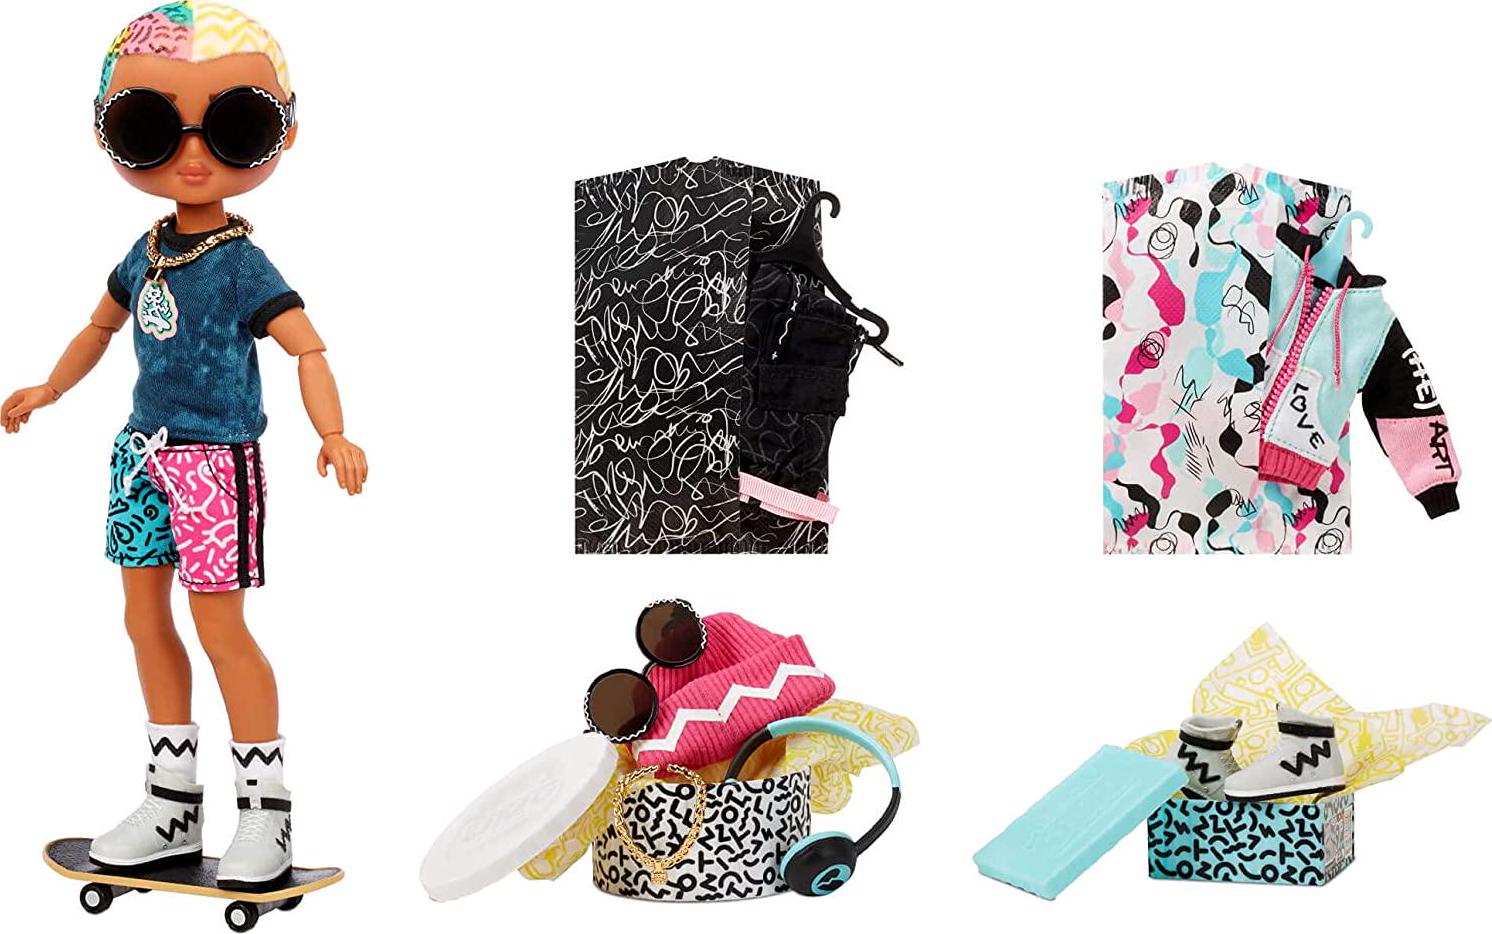 L.O.L. Surprise, LOL Surprise OMG Guys Fashion Doll Cool Lev with 20 Surprises, Poseable, Including Skateboard, Outfit and Accessories Playset - Kids and Collectors, Toys for Girls Boys Ages 4 5 6 7+ Years Old